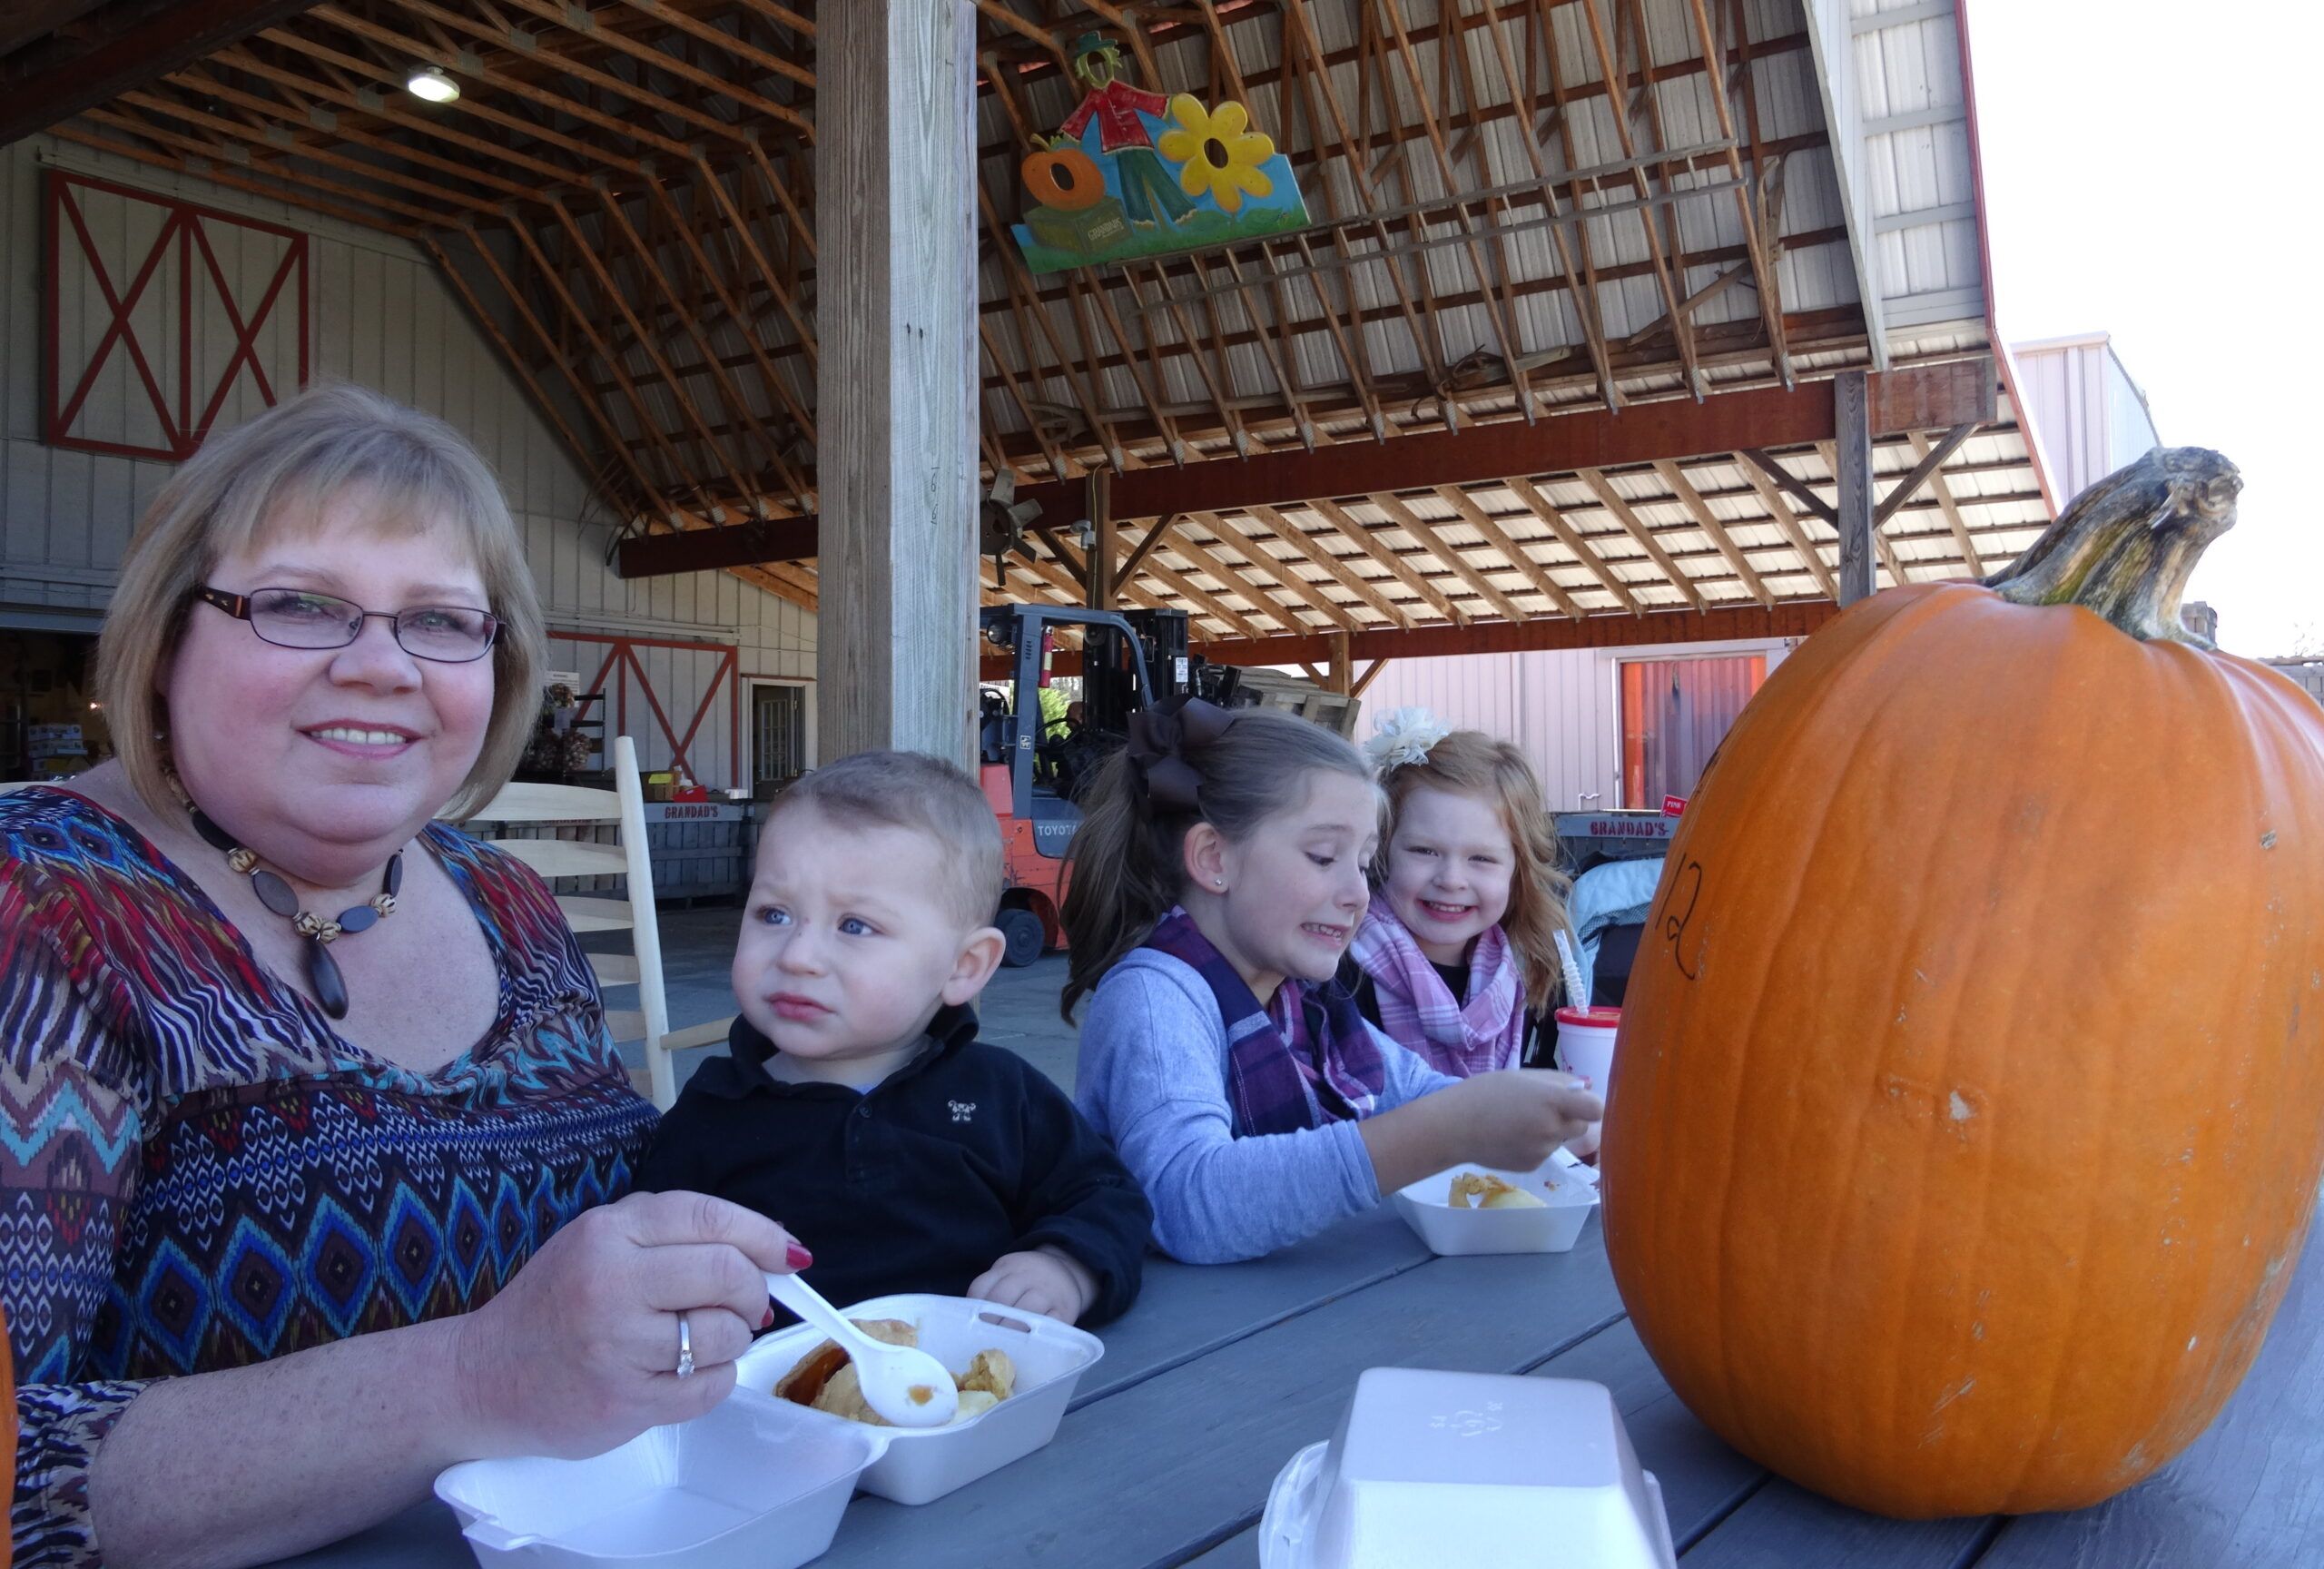 At the end of the day at the apple orchard, apple dumplings for the grandkids.